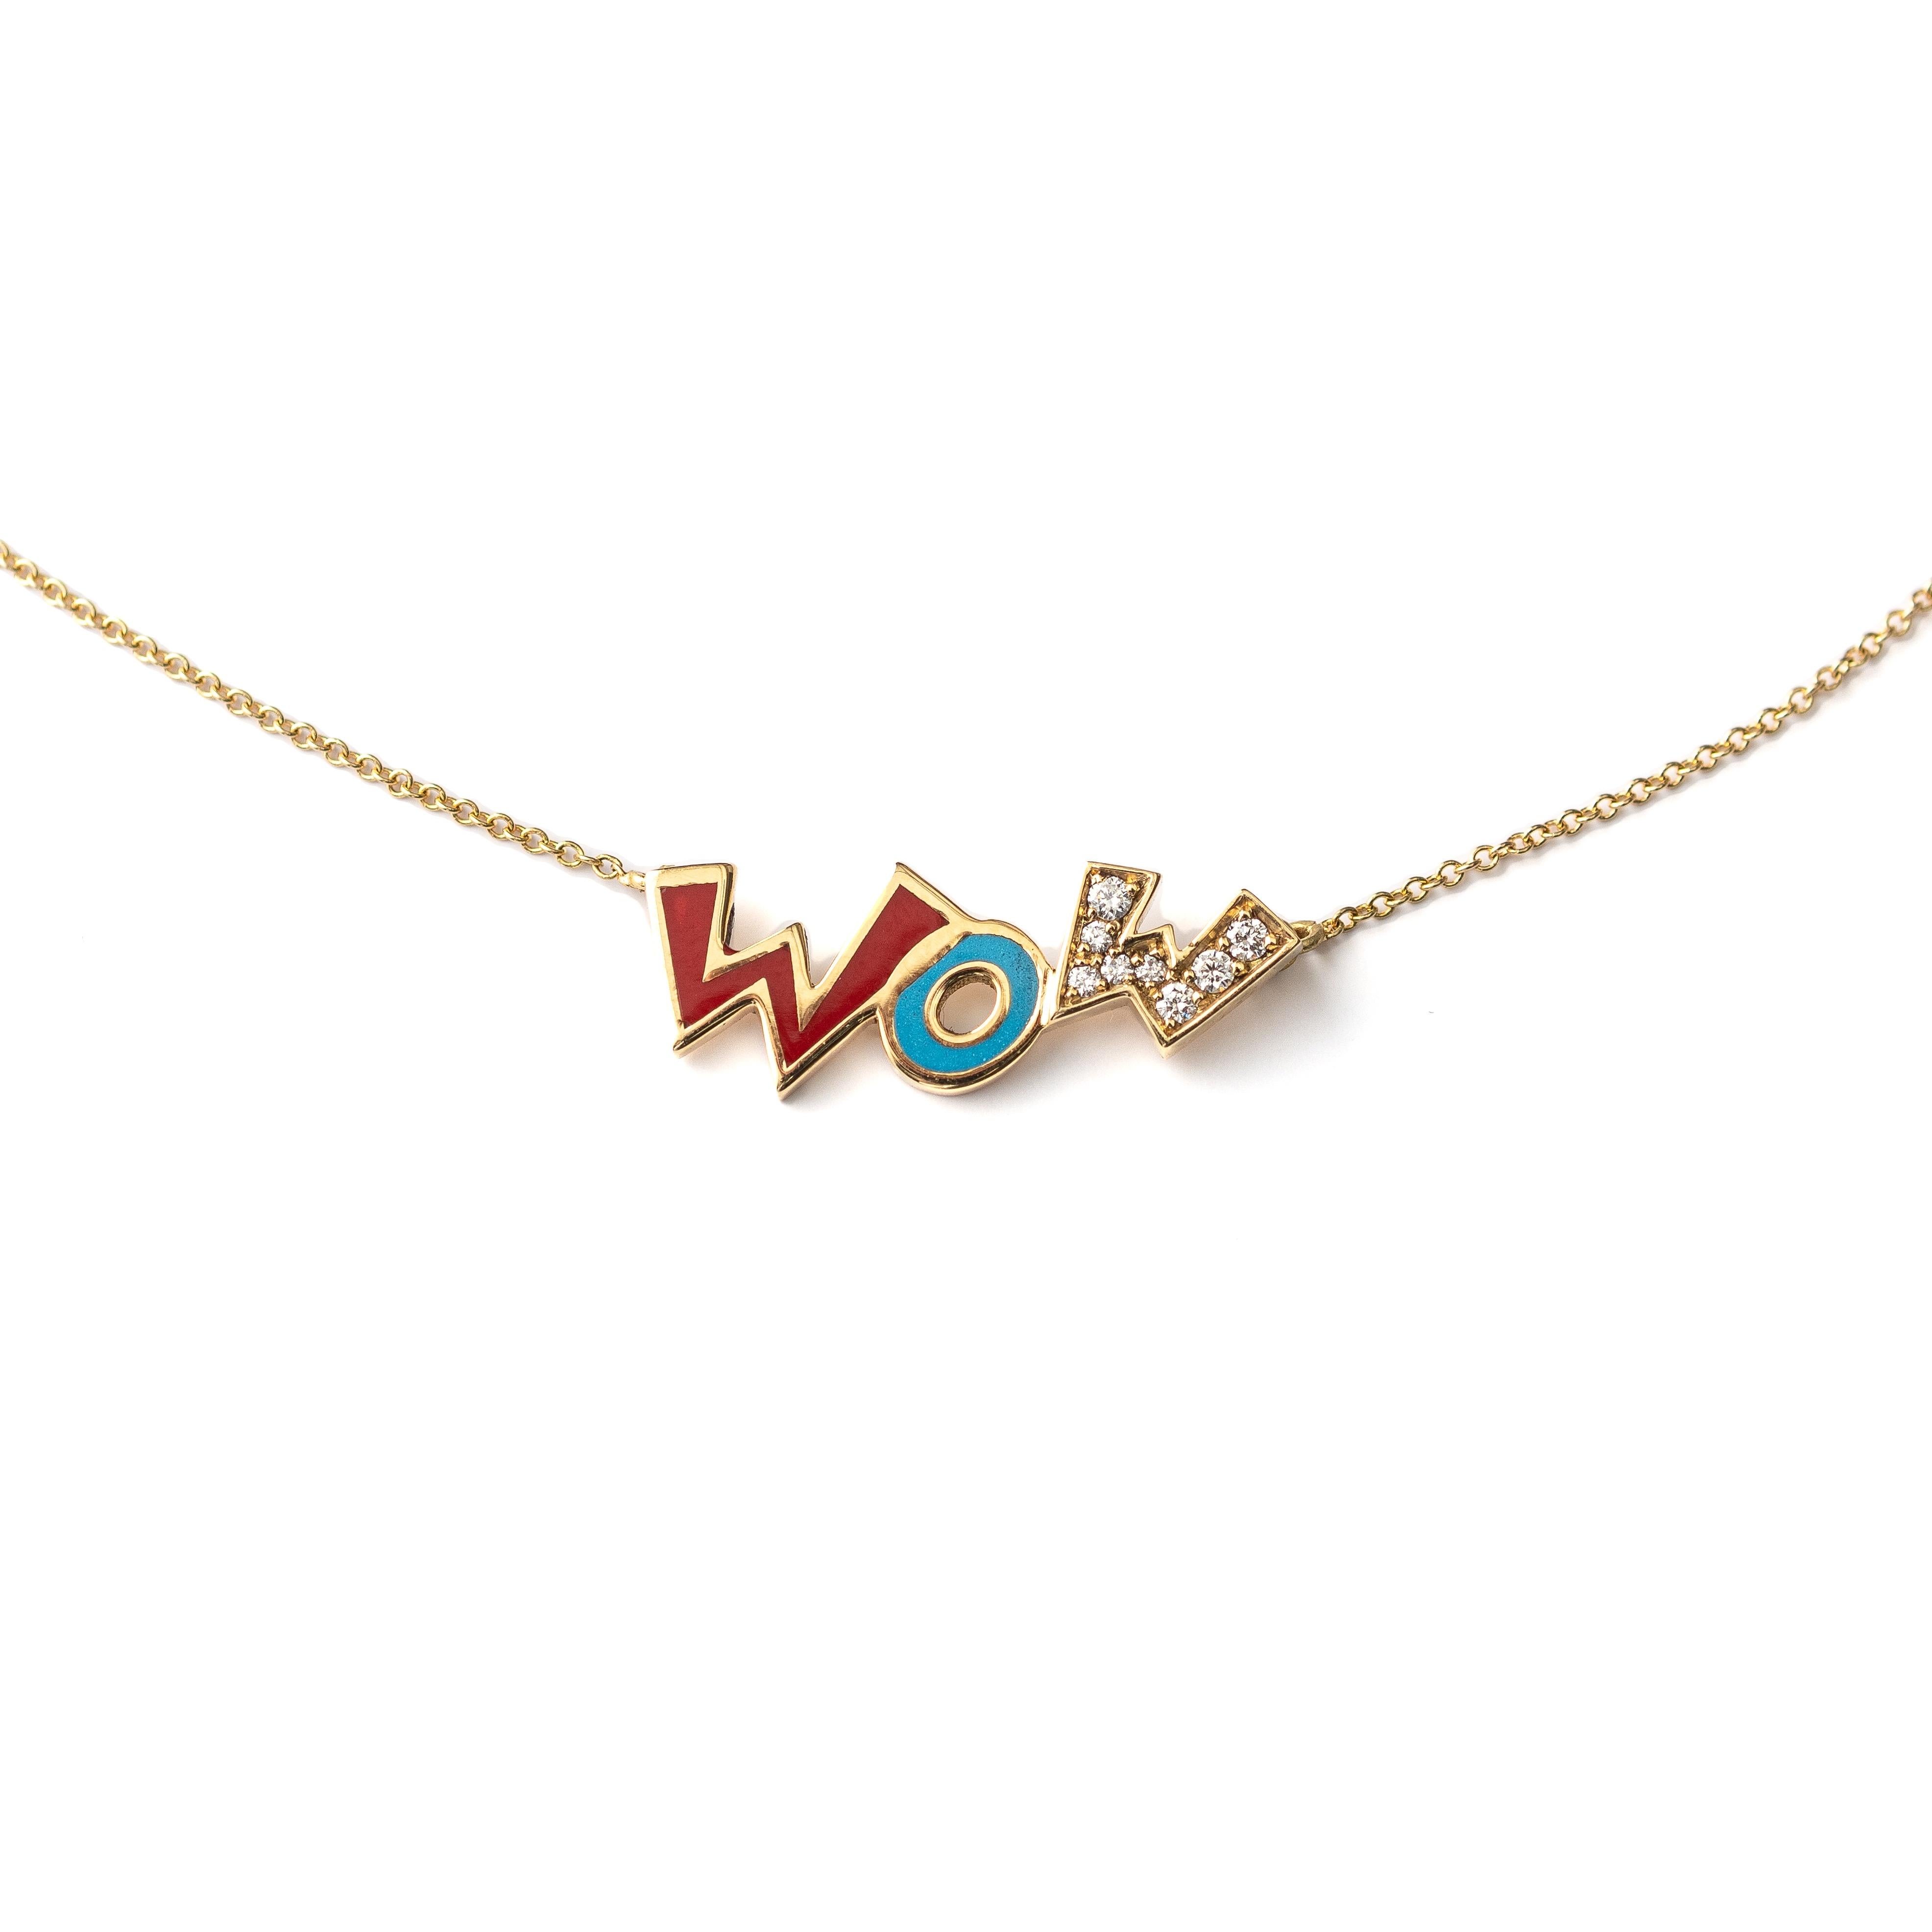 The Wow, necklace is crafted in 18K yellow gold, hallmarked in Cyprus. This fun and colourful pendant, necklace comes in a highly polished finish and features Red and blue enamel as well as 0.1 Cts of white Diamonds. Light and comfortable, it’s 